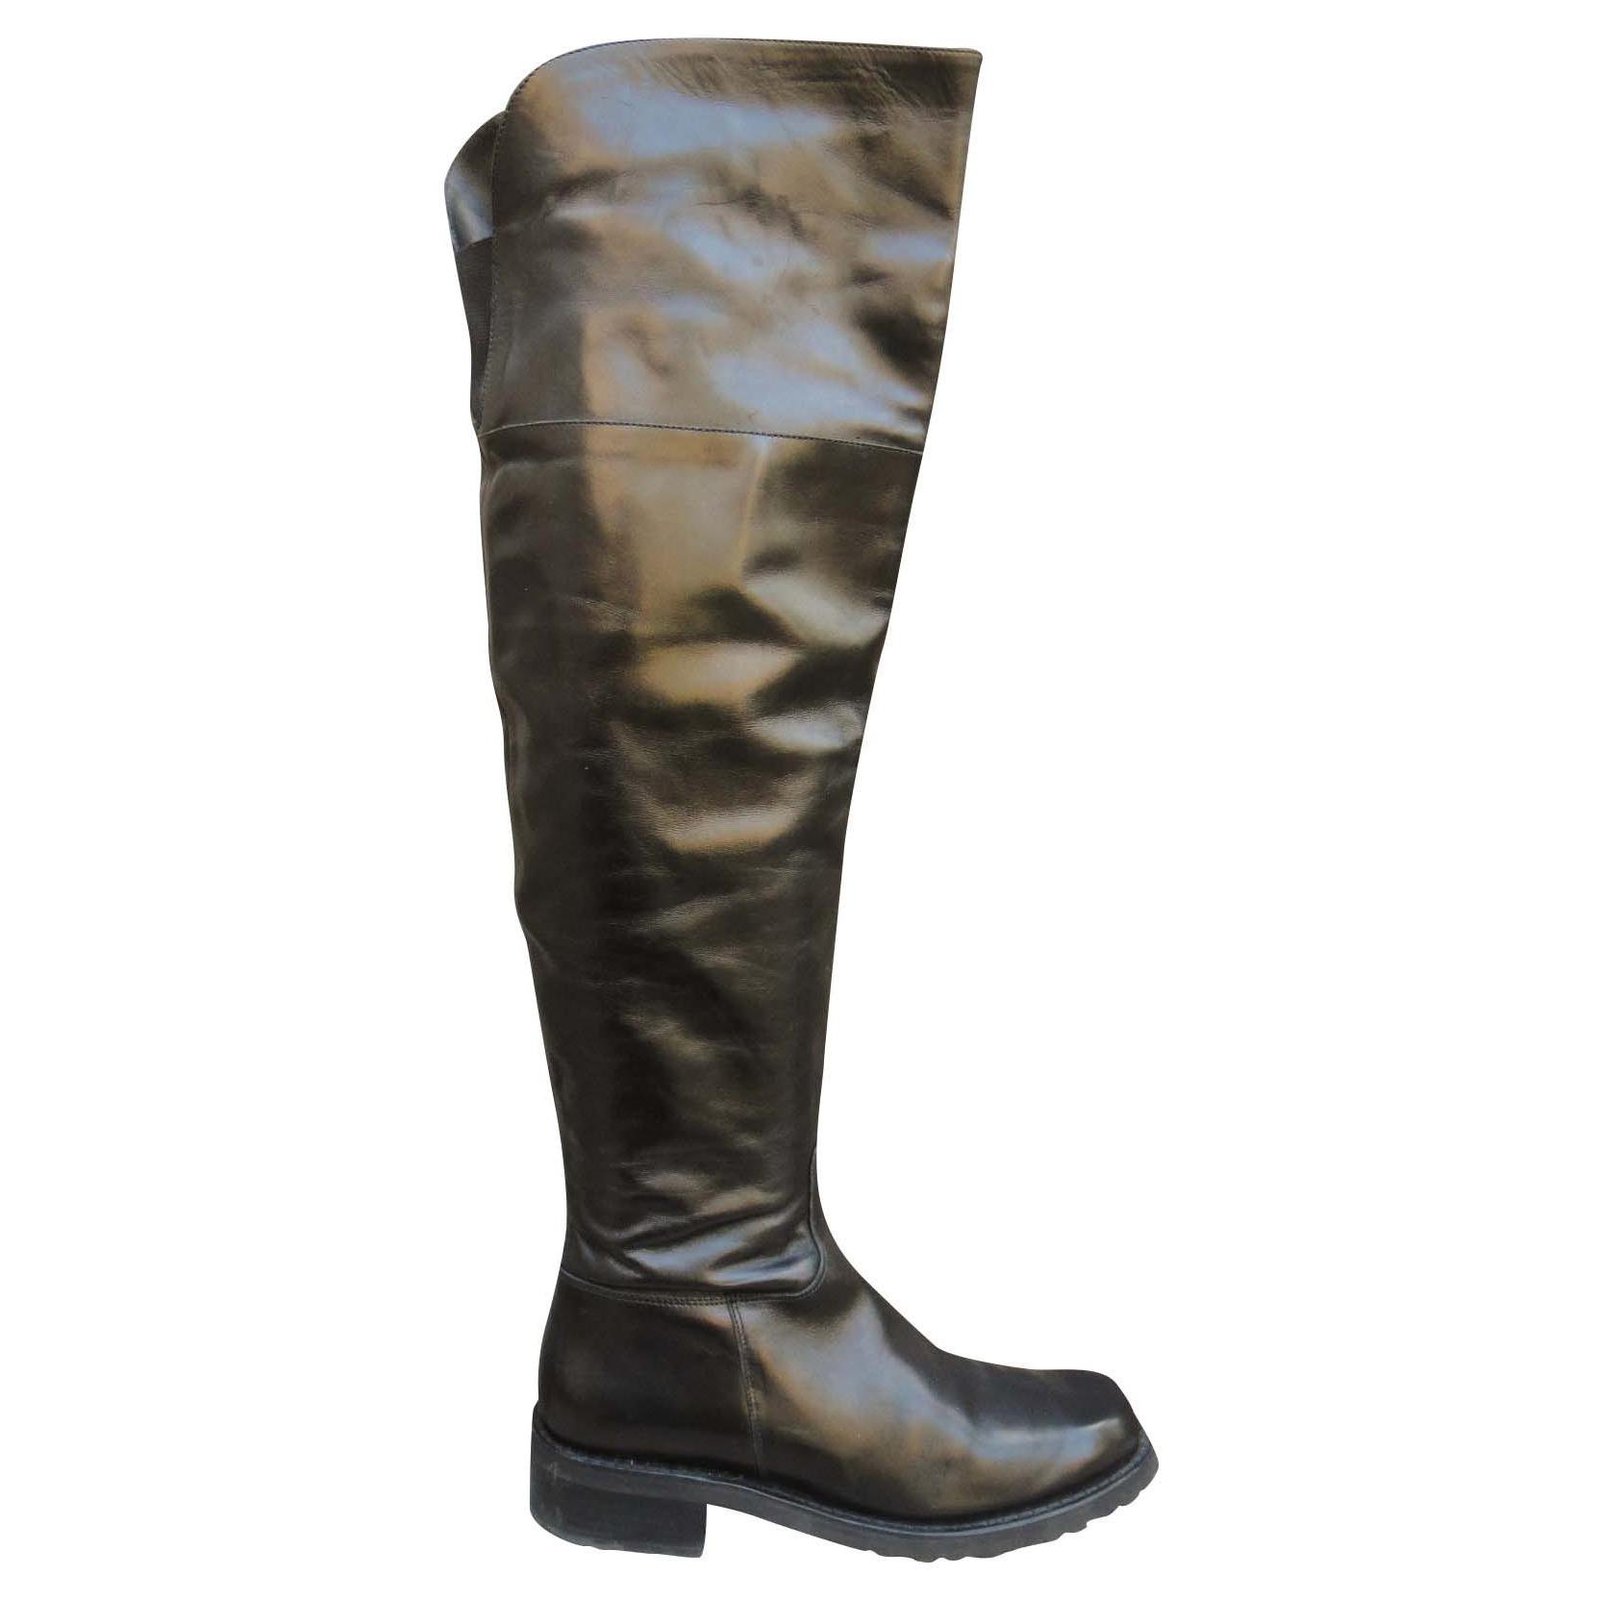 leather thigh high boots uk